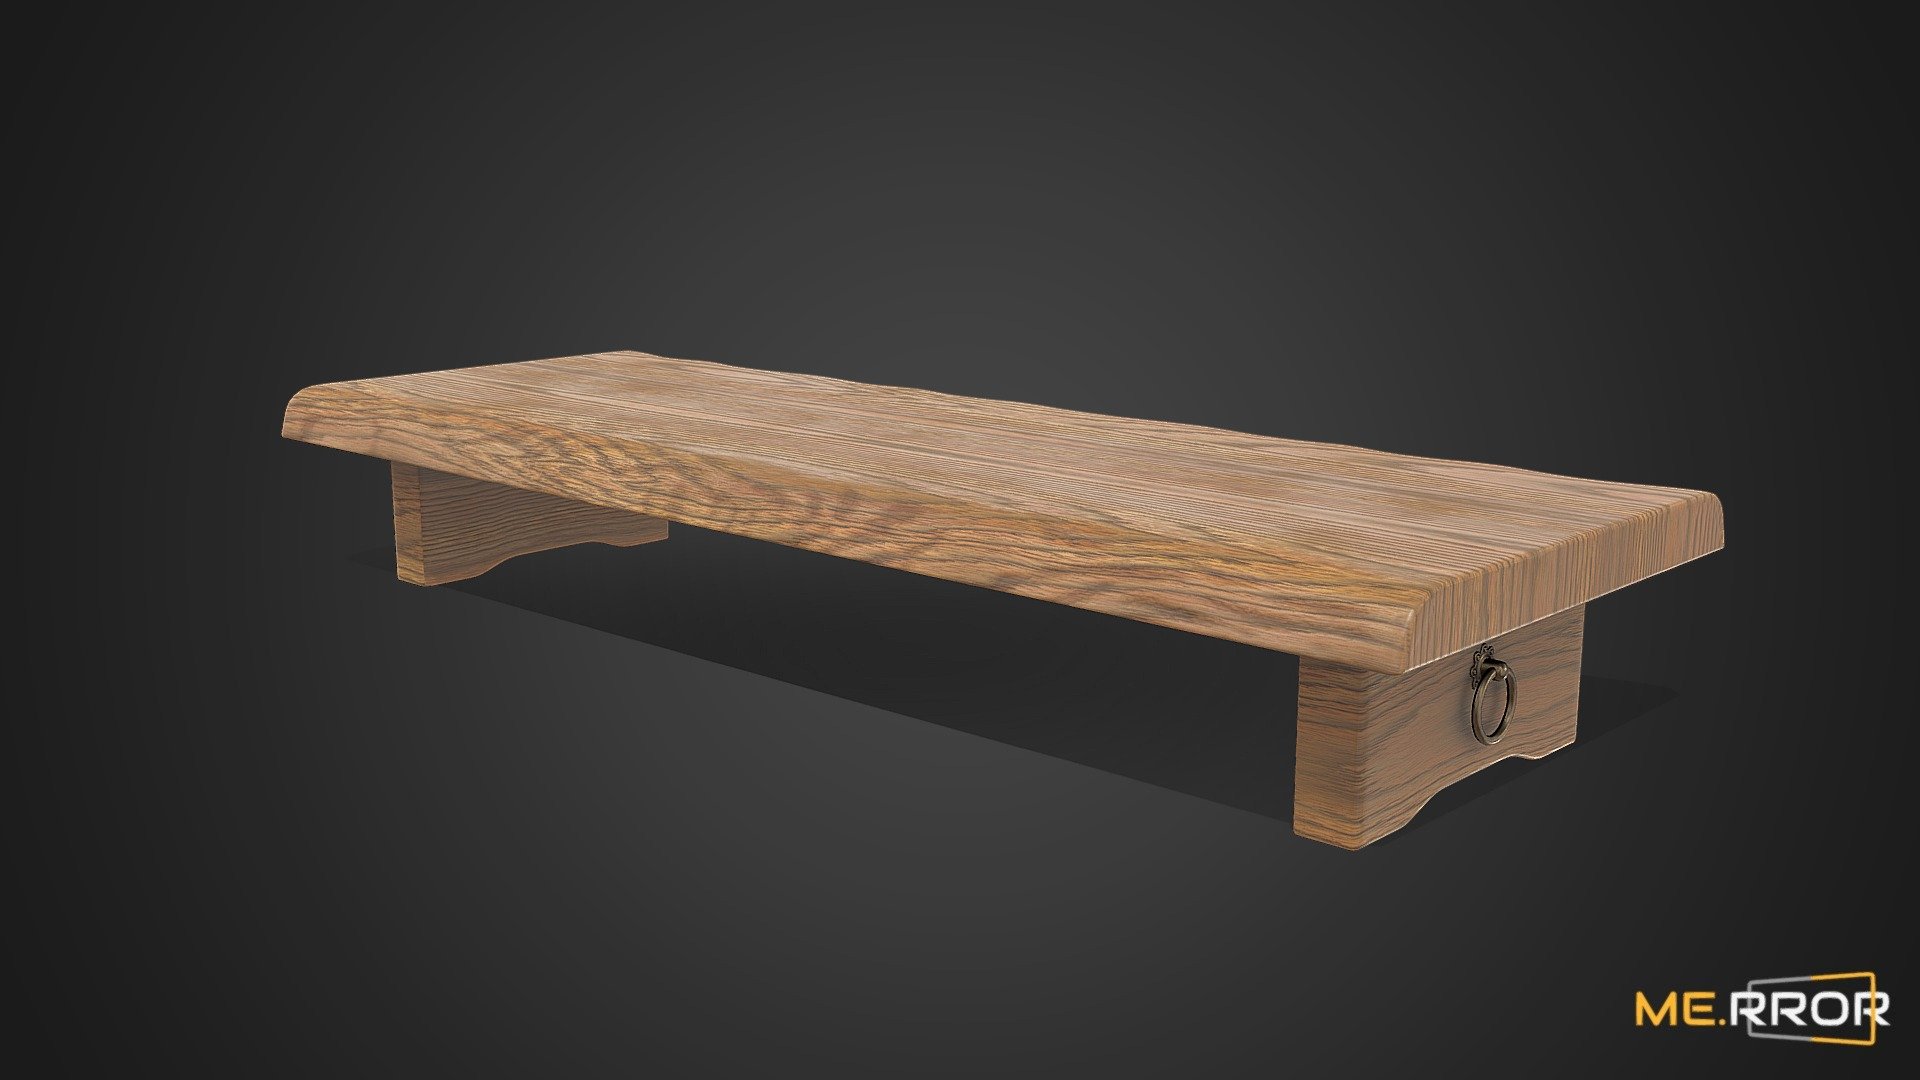 MERROR is a 3D Content PLATFORM which introduces various Asian assets to the 3D world


3DScanning #Photogrametry #ME.RROR - [Game-Ready] Traditional Wooden Low Table - Buy Royalty Free 3D model by ME.RROR Studio (@merror) 3d model